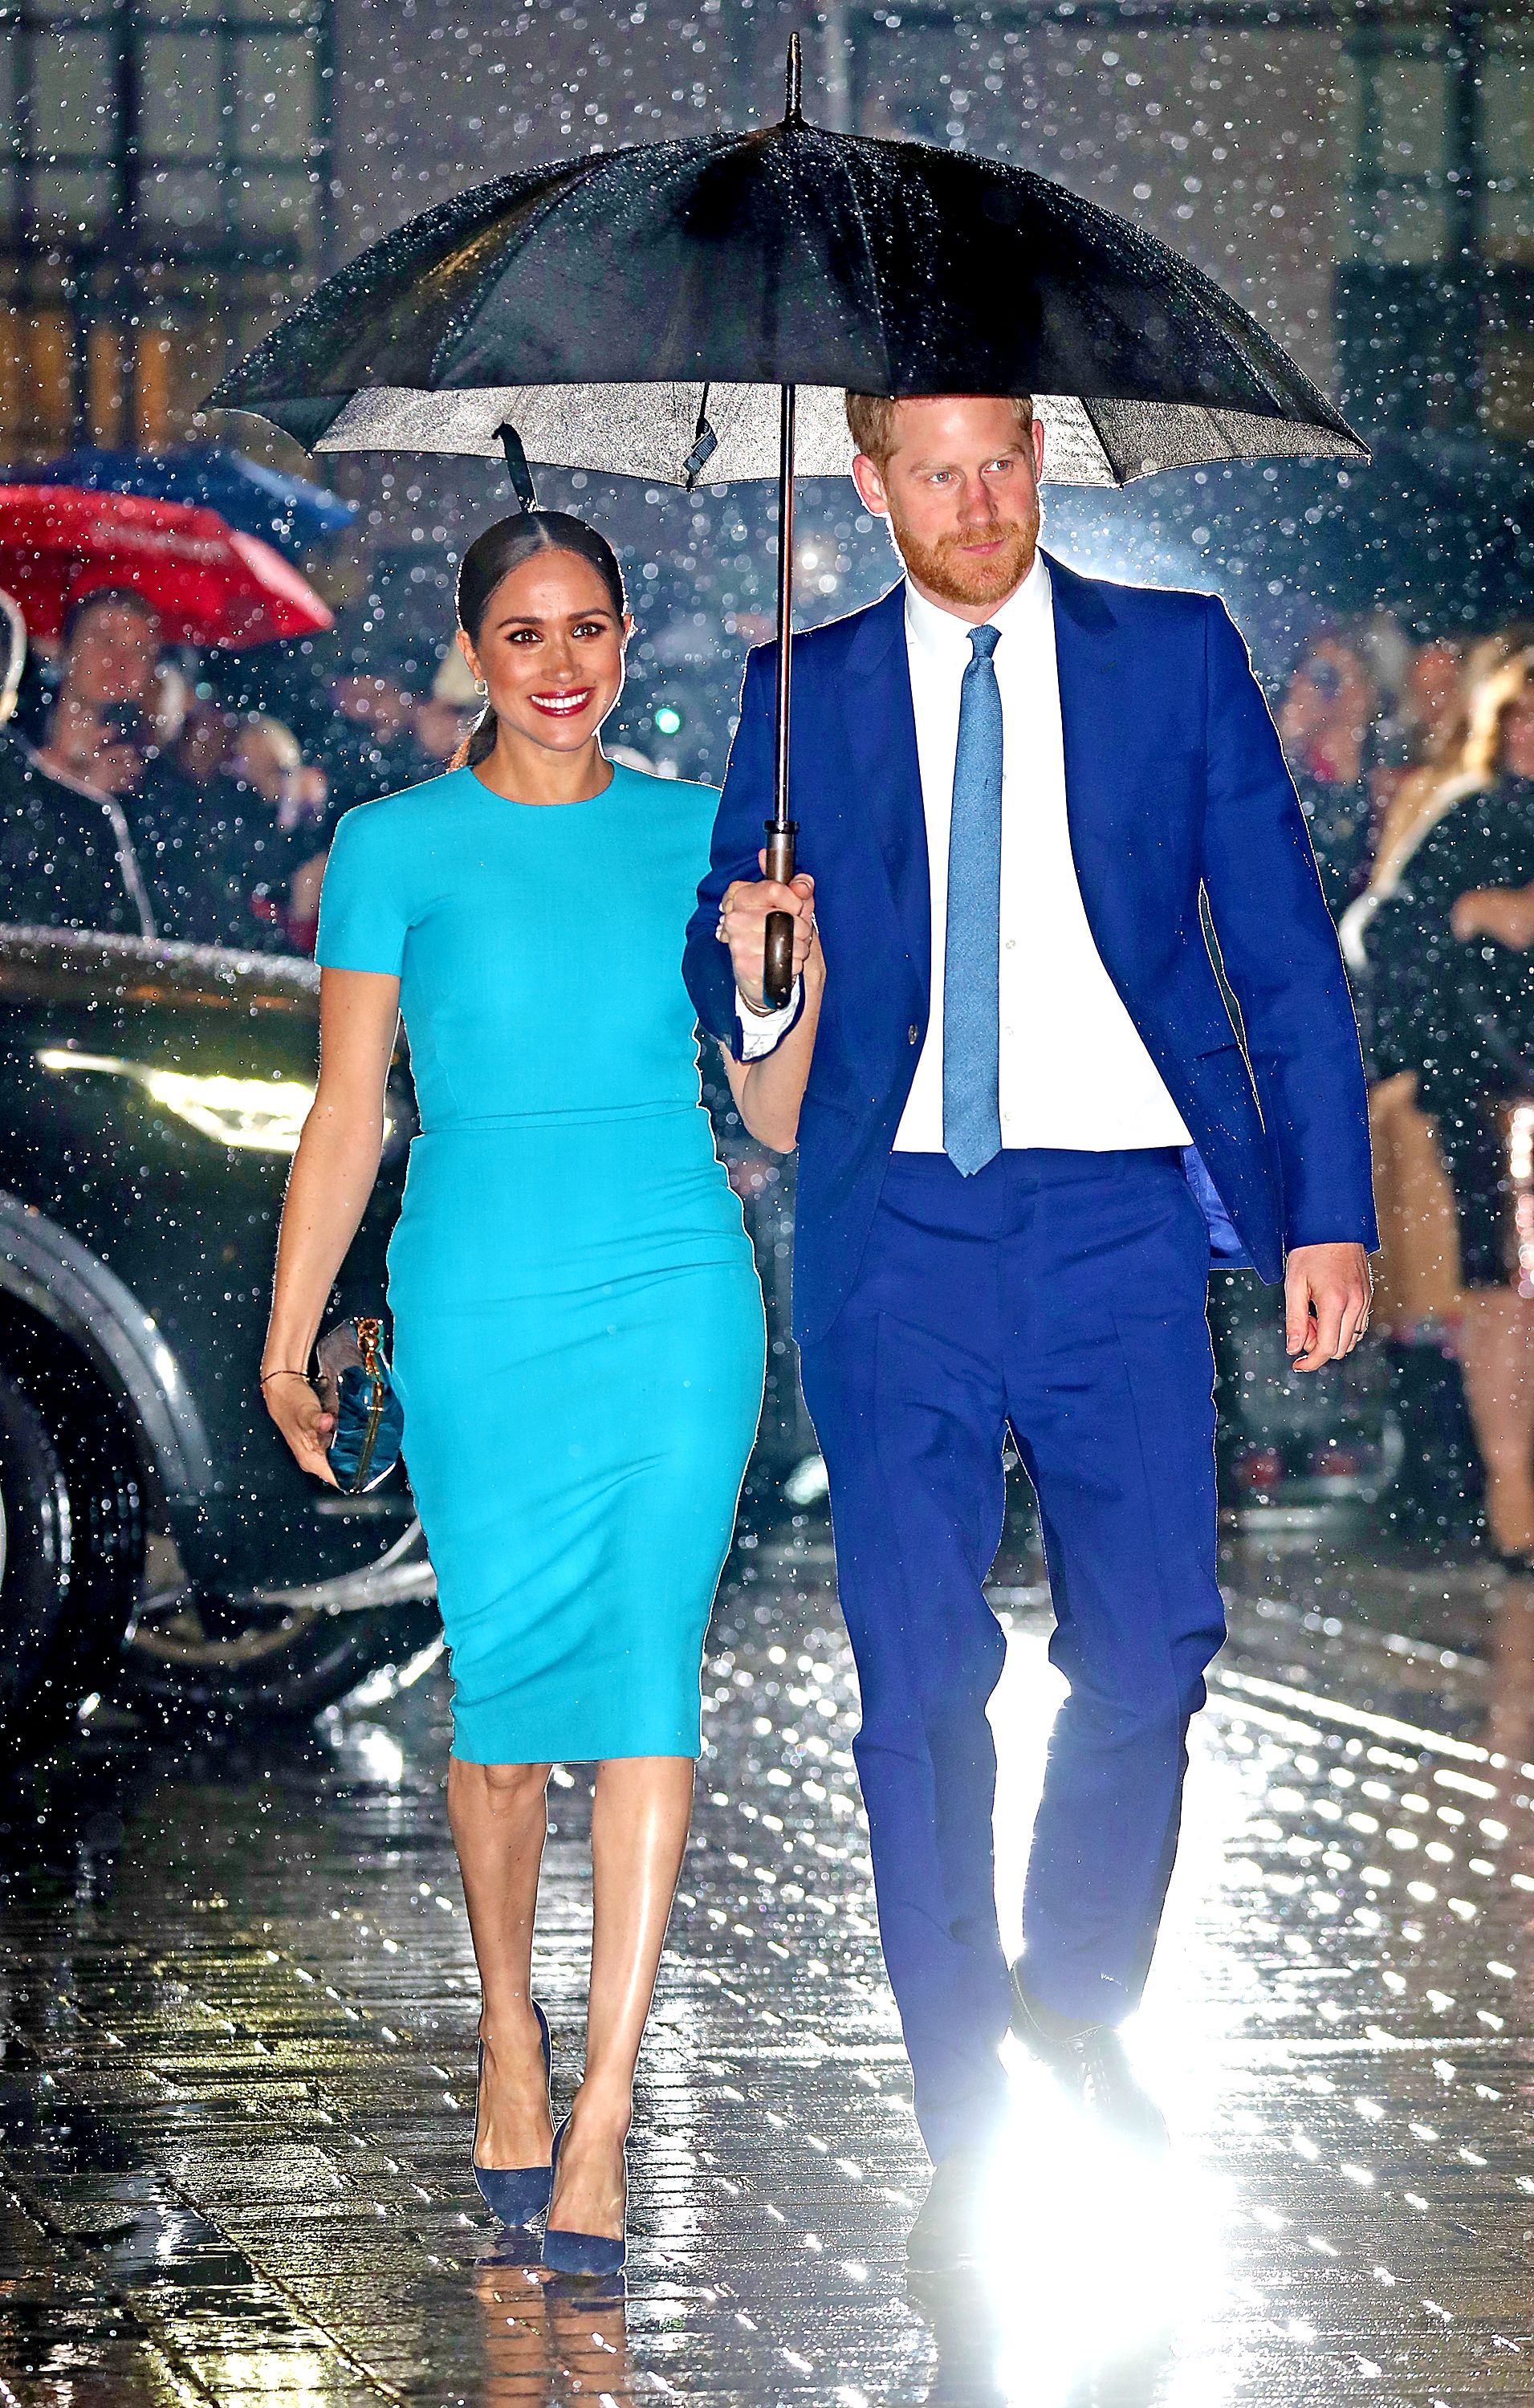 Prince Harry and Meghan Markle appear at an event.